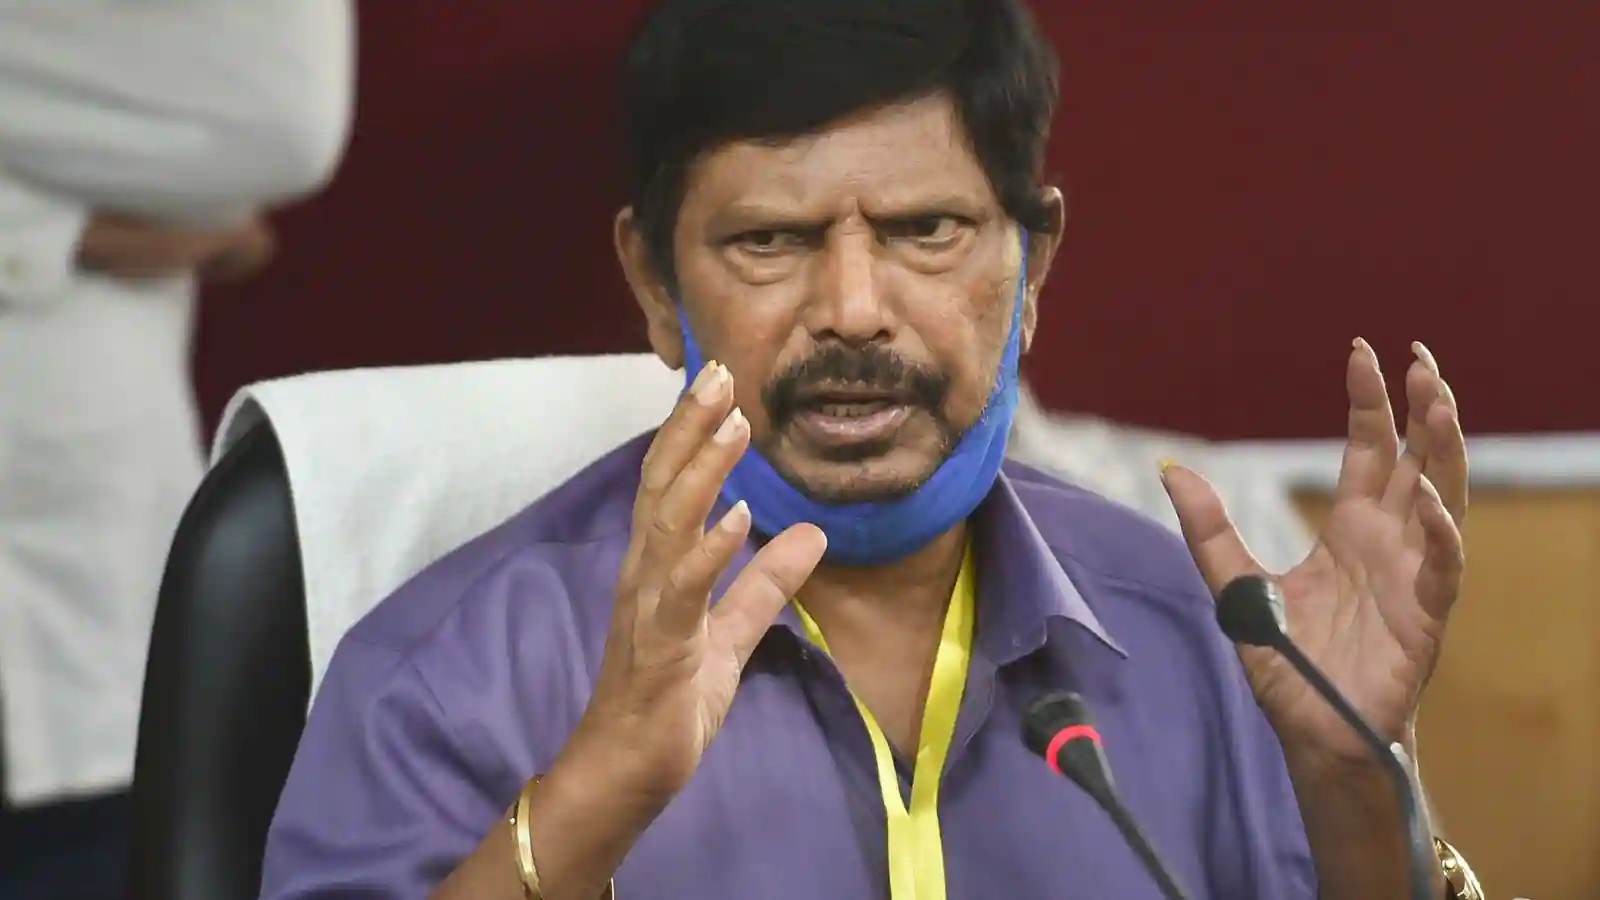 We will save the loudspeakers of the mosque on May 3, said Ramdas Athawale